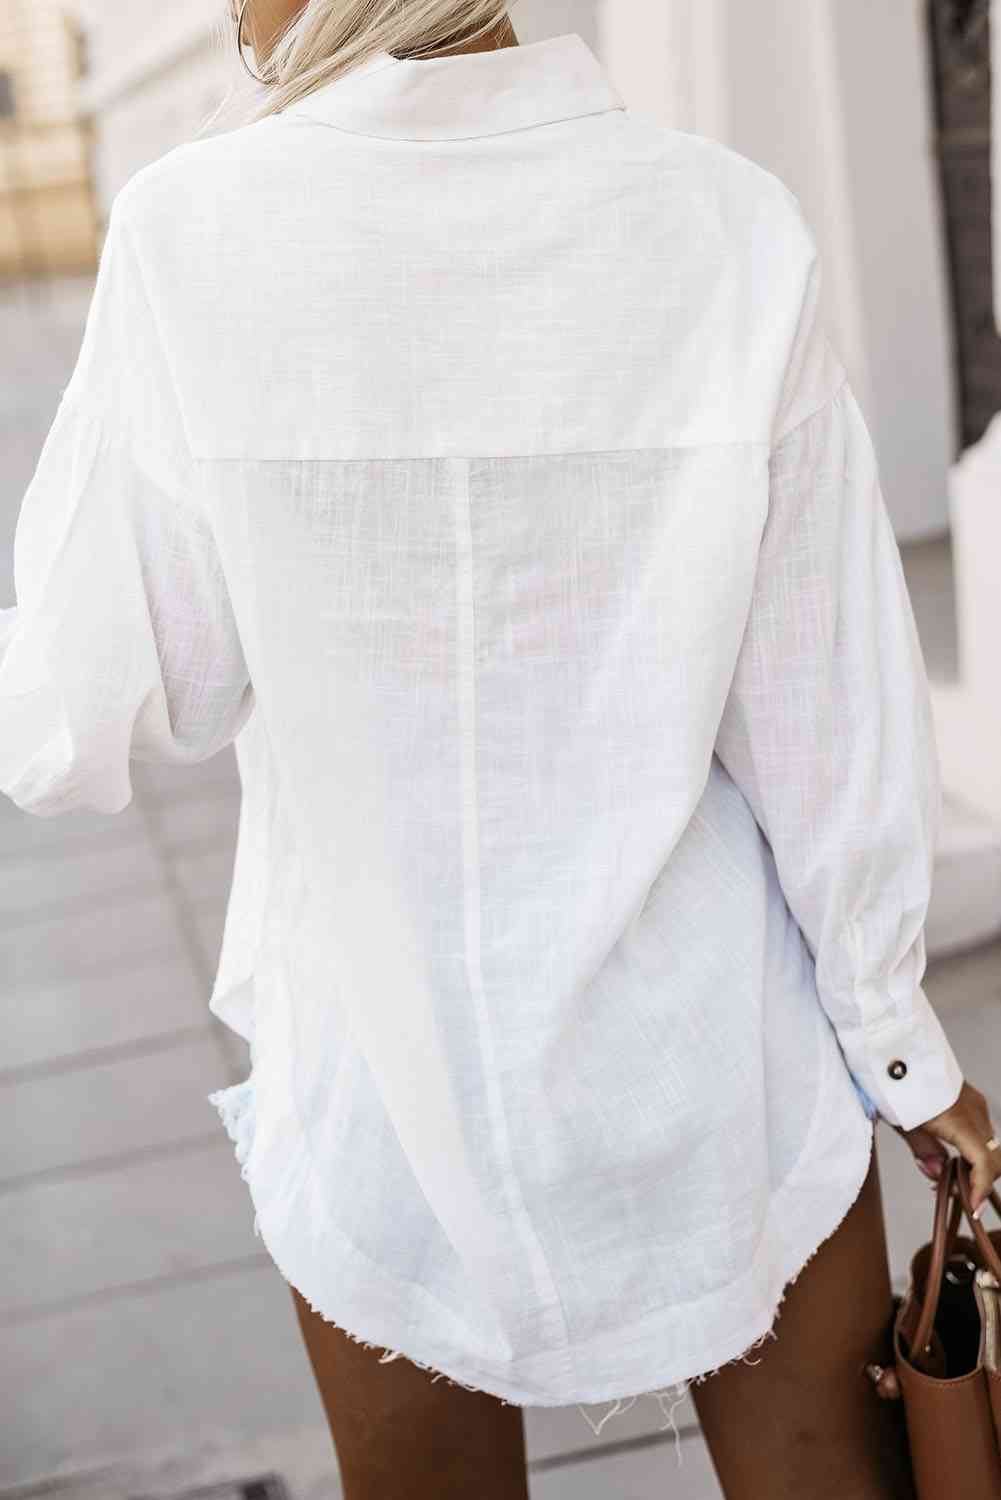 Pearl Mist Button Down 100% Cotton Shirt | Hypoallergenic - Allergy Friendly - Naturally Free